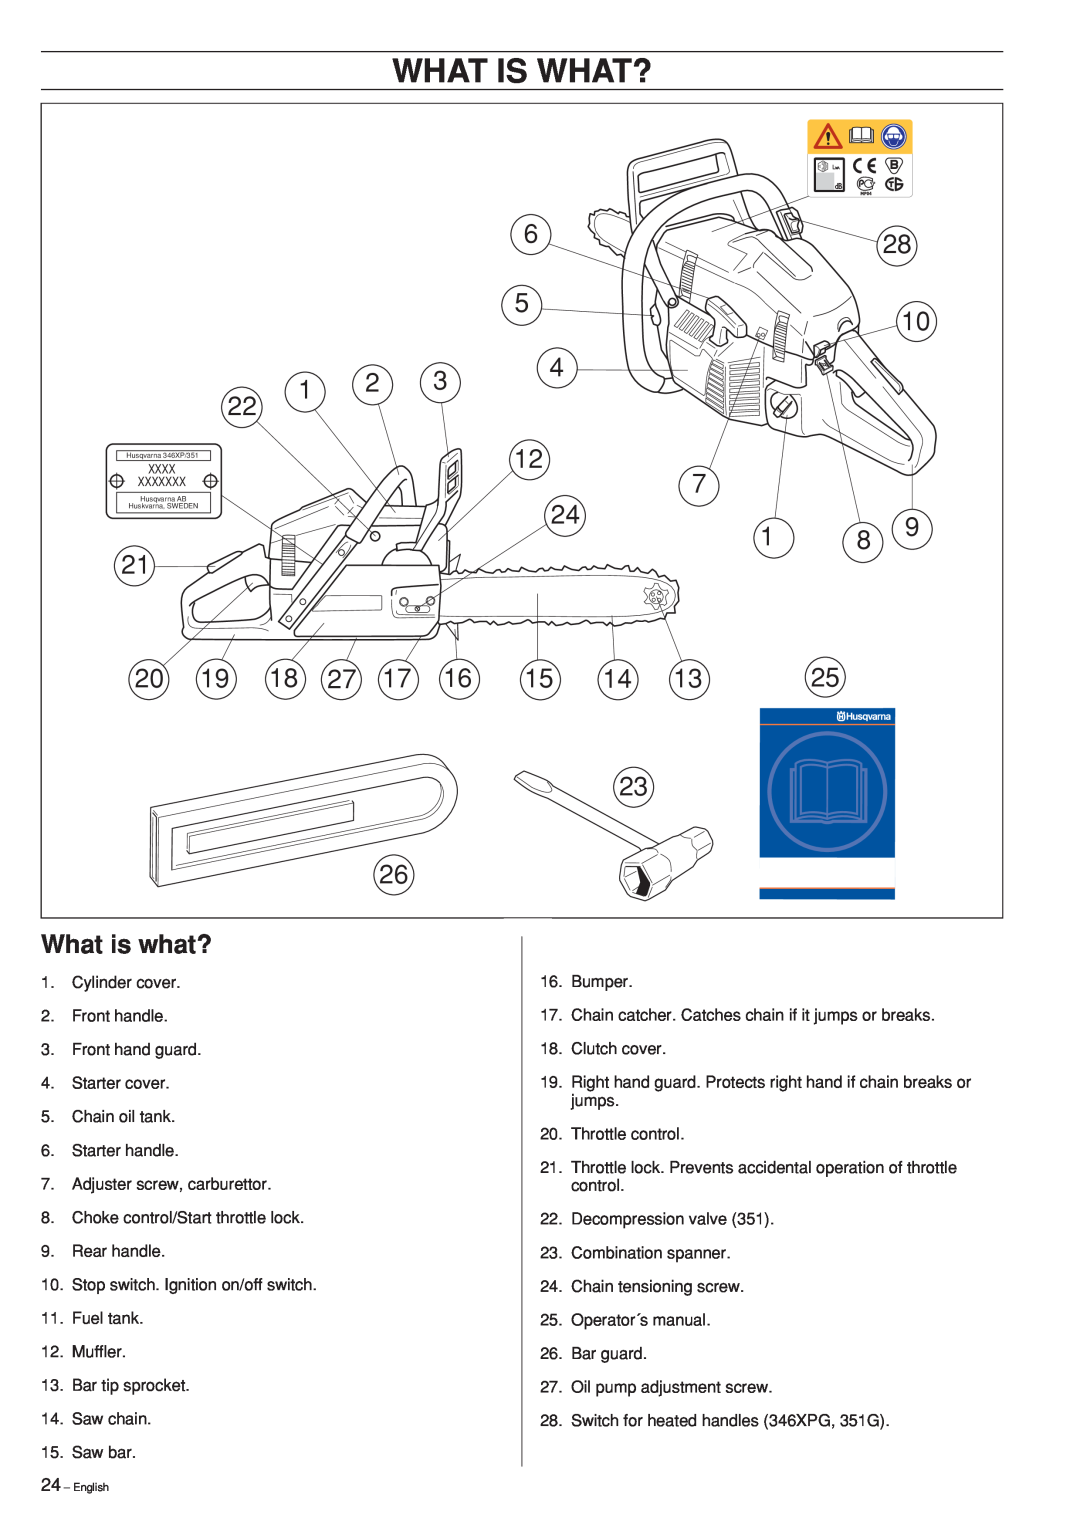 Husqvarna 346XP 351 manual What Is What?, What is what? 